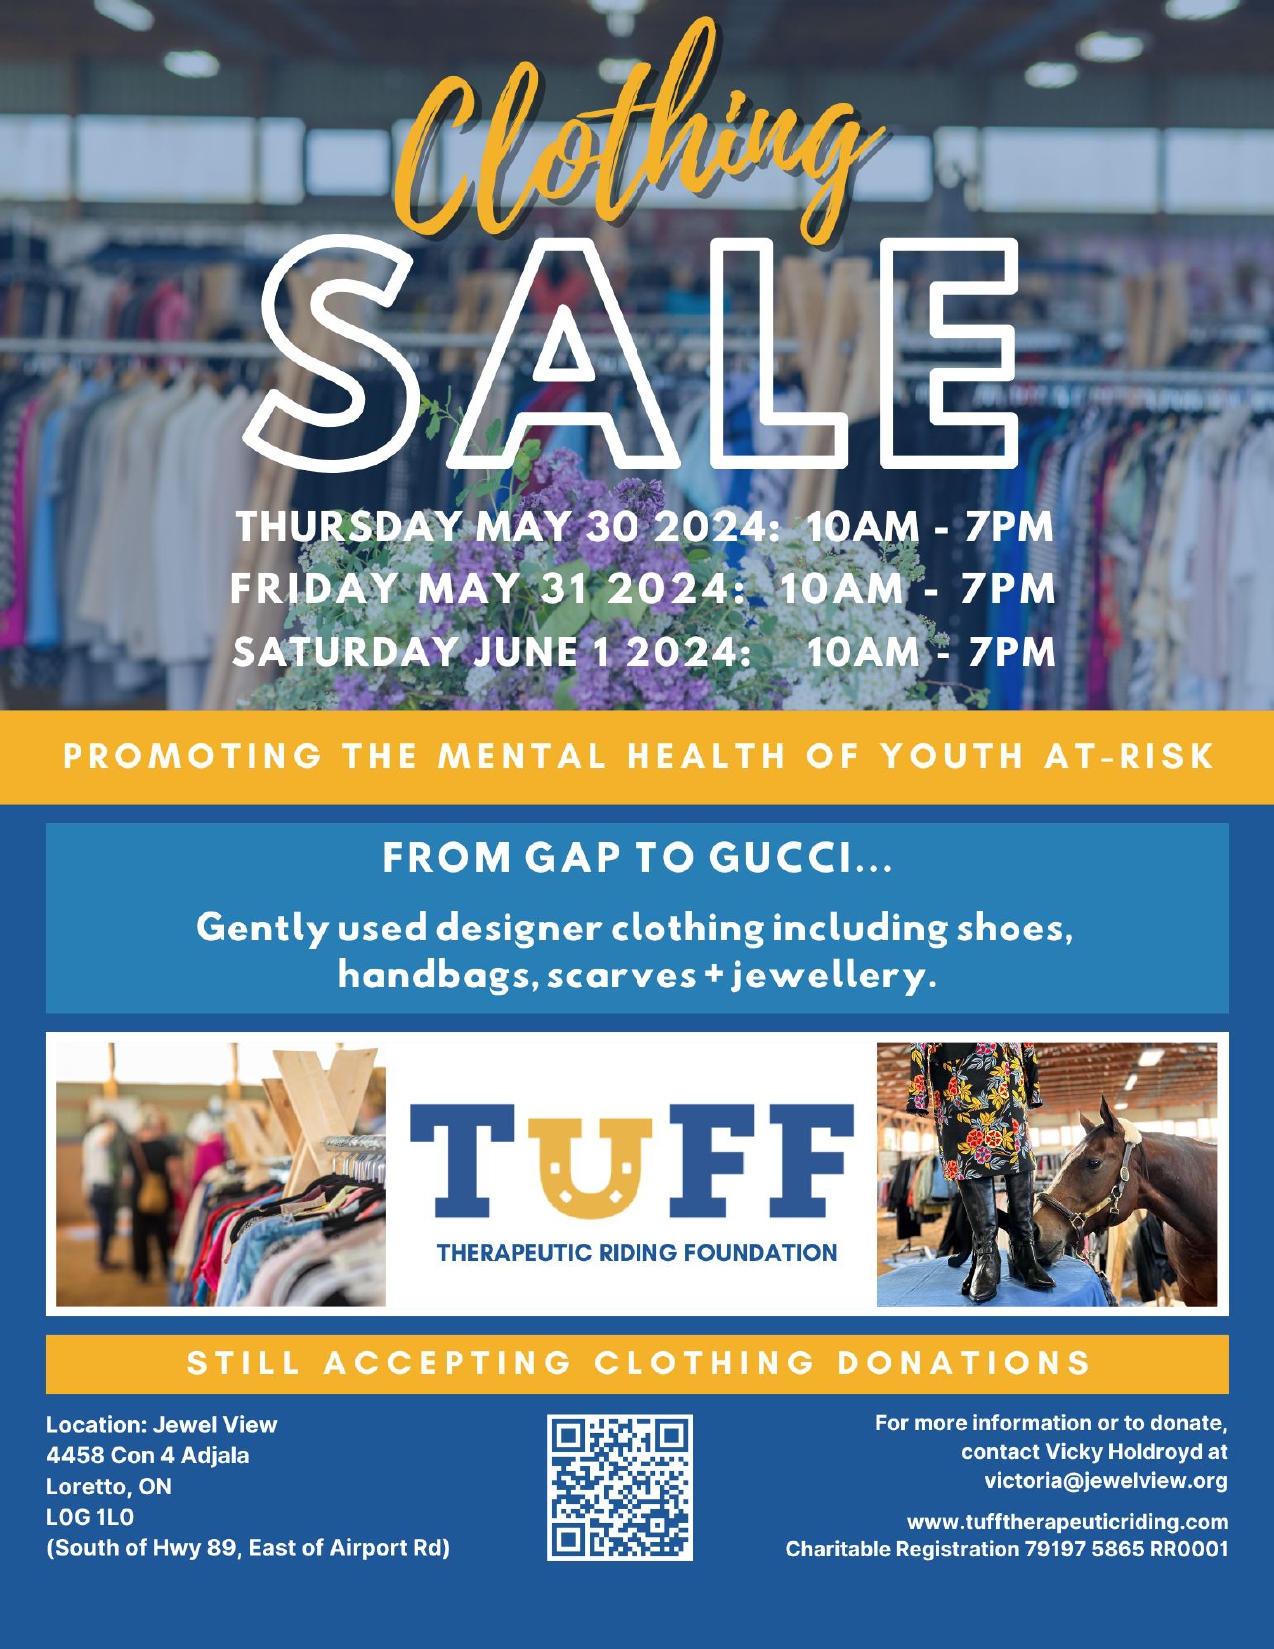 clothing-sale-TUFF-therapeutic-riding-foundation